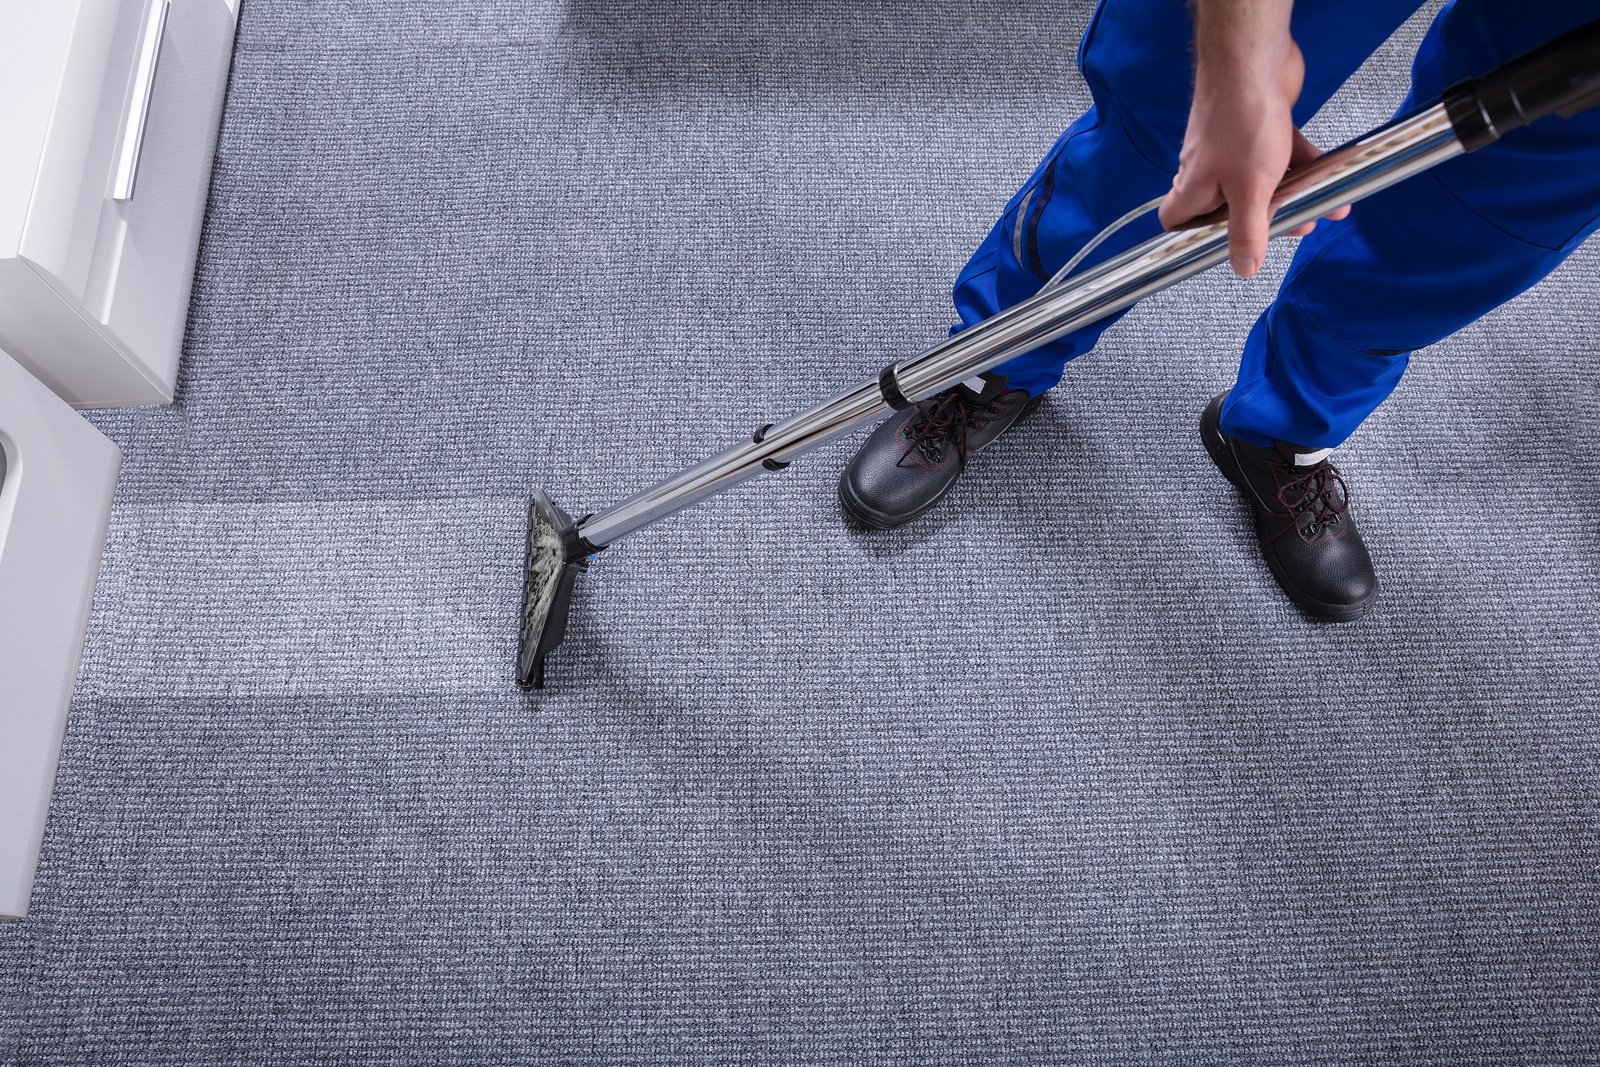 Get rid of microbes with the high-quality cleaning services